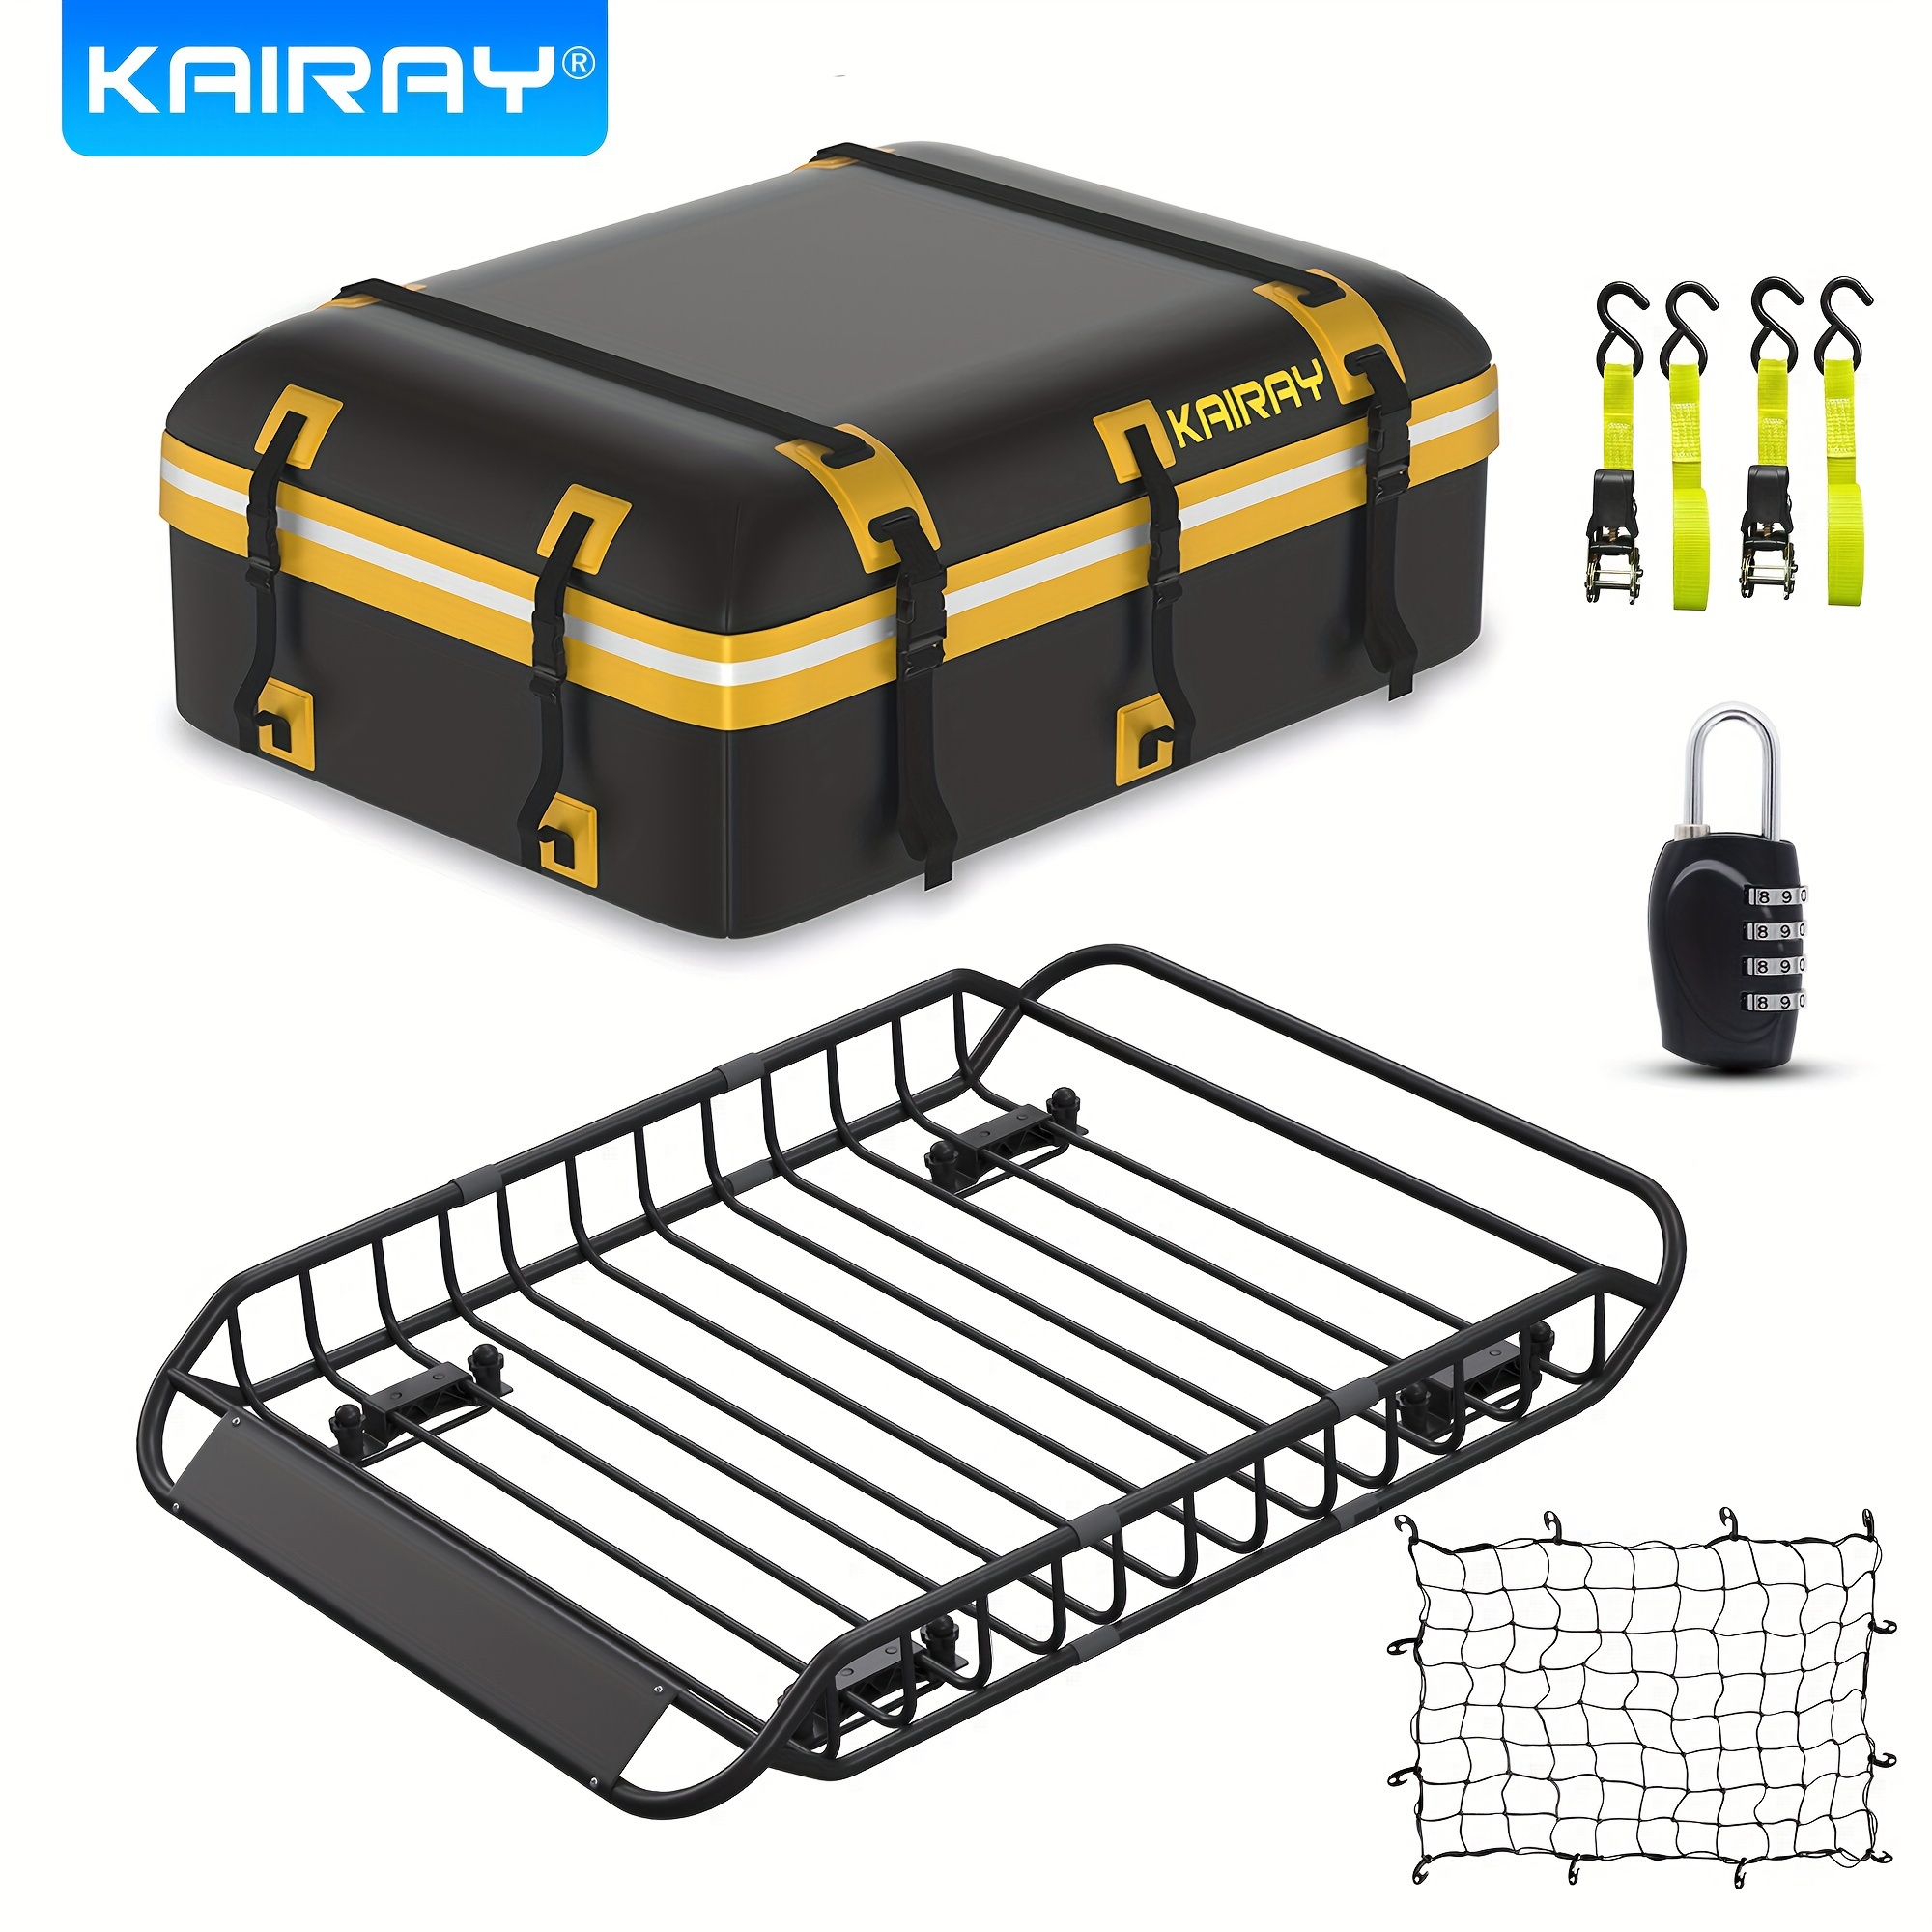 

Kairay Roof Rack Cargo Basket Extendable Universal Rooftop Luggage Carrier For Truck Cars Suv With Waterproof Cargo Bag, Cargo Net, Ratchet Straps & Outdoor Combination Lock